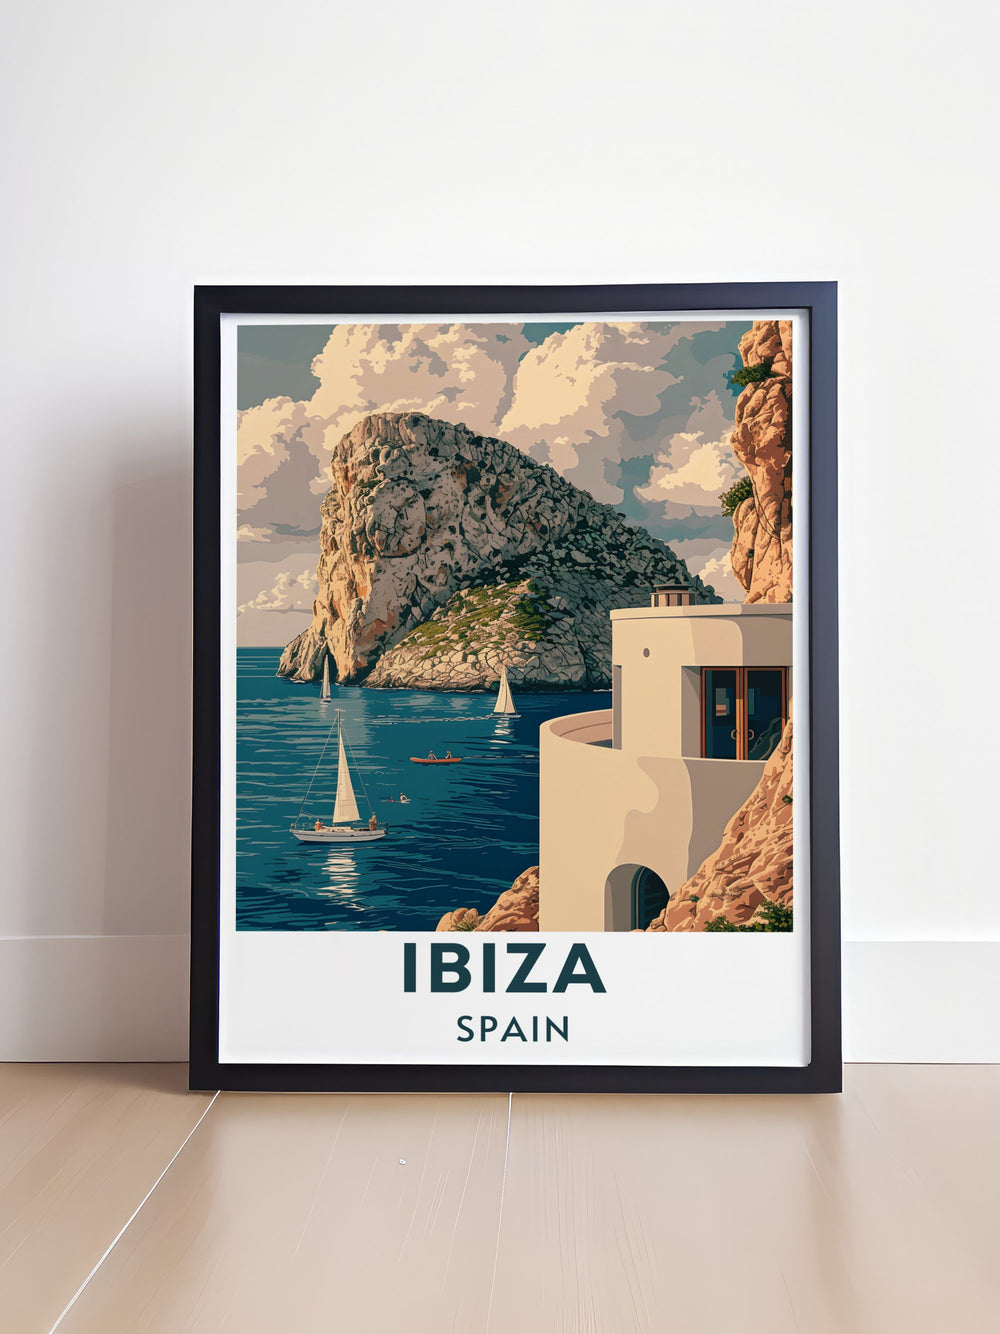 Capturing the dynamic nightlife and stunning beaches of Ibiza, this travel poster brings the vibrant spirit of the island into your home decor. Perfect for travelers and those who love lively atmospheres.